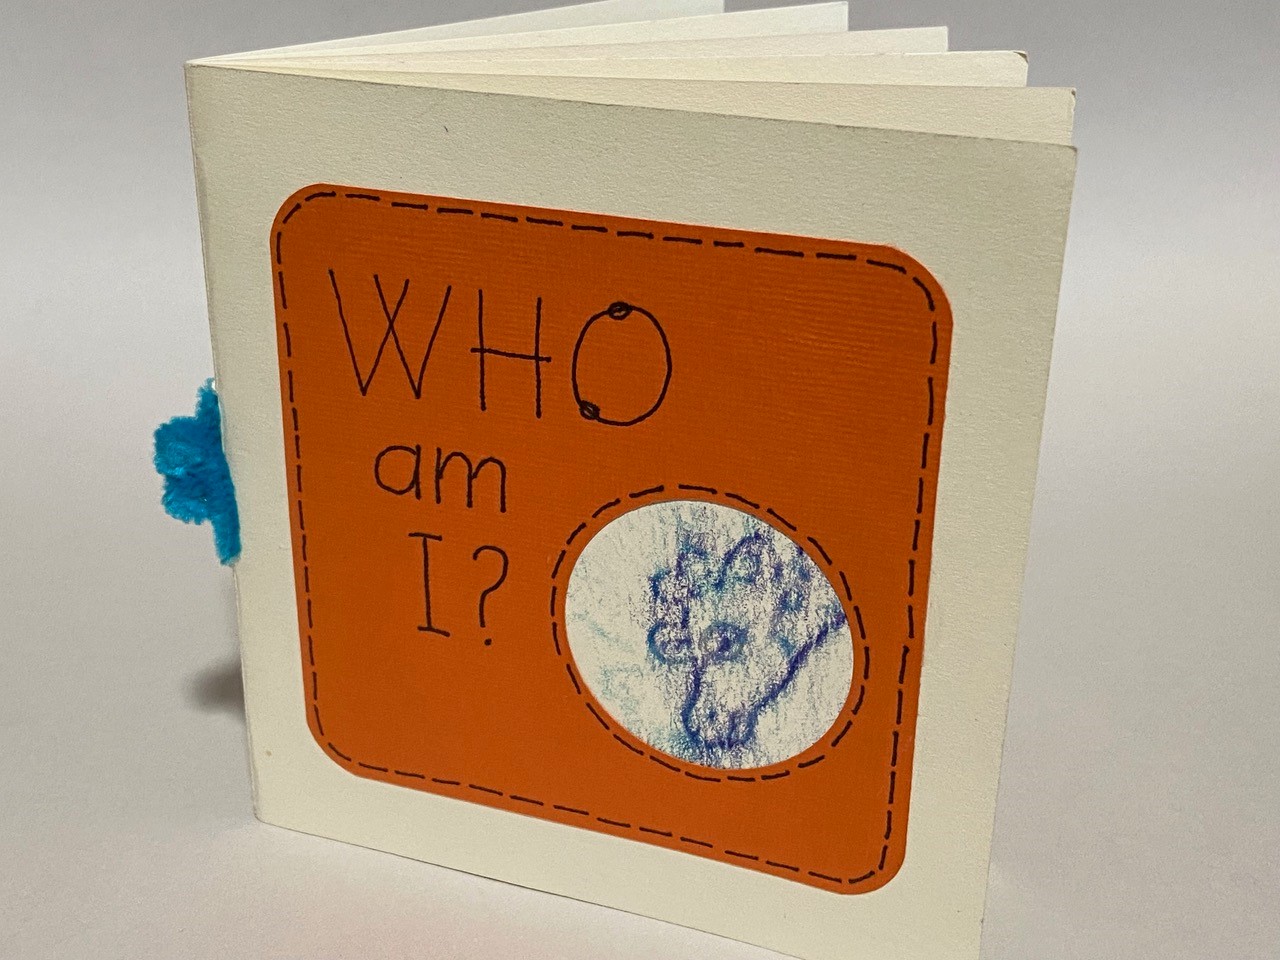 Hand made children's book entitled "Who Am I?" with a small photo of a giraffe on the cover